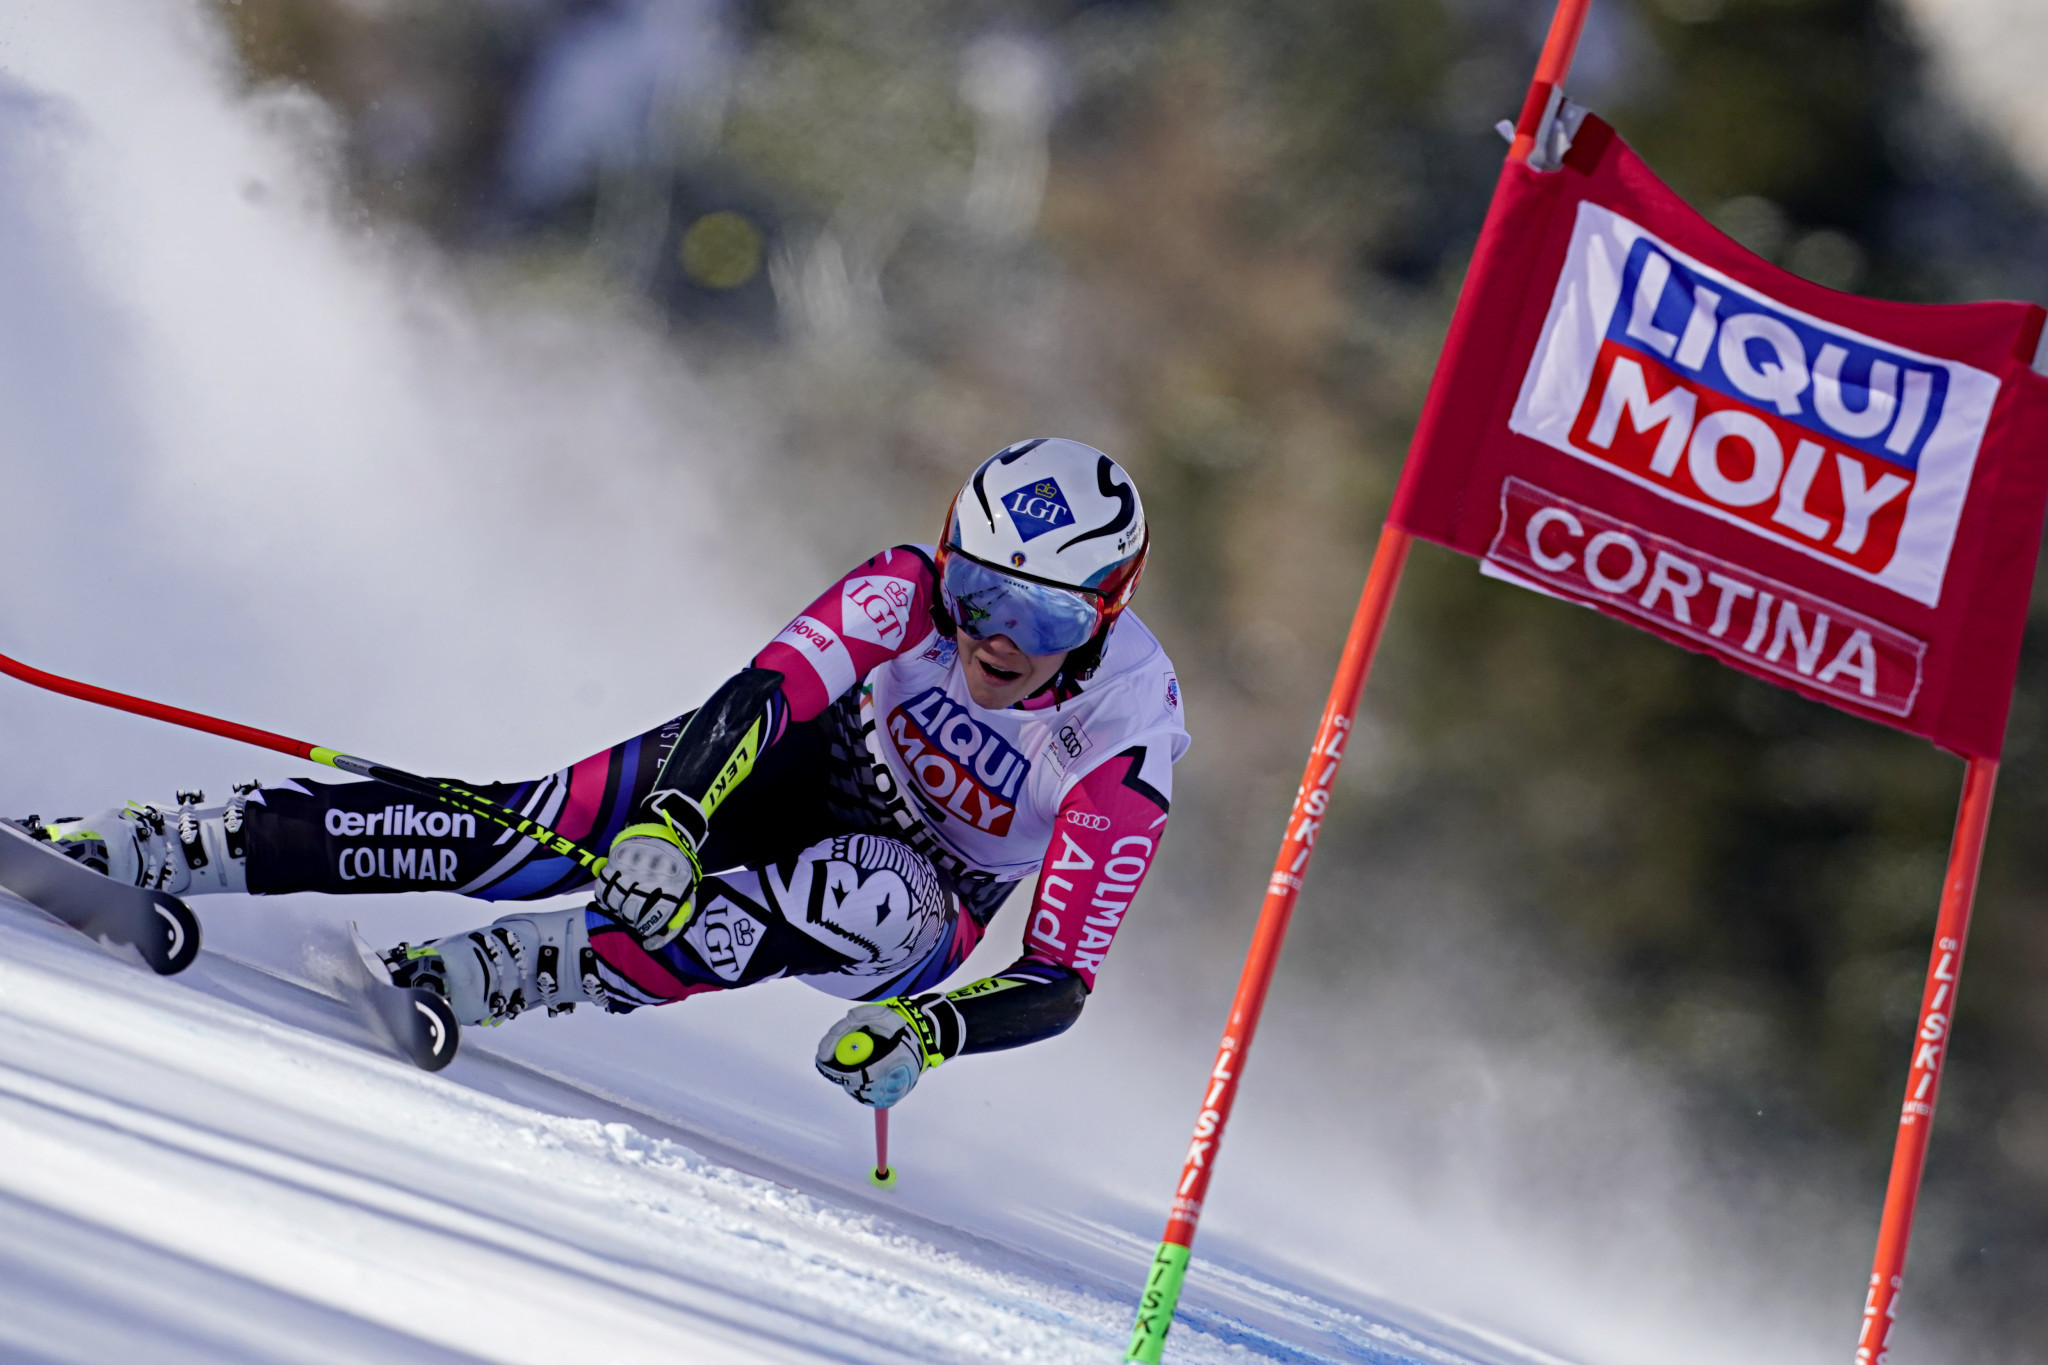 The Alpine World Ski Championships in Cortina d'Ampezzo are scheduled to take place from February 9 to 21 ©Getty Images